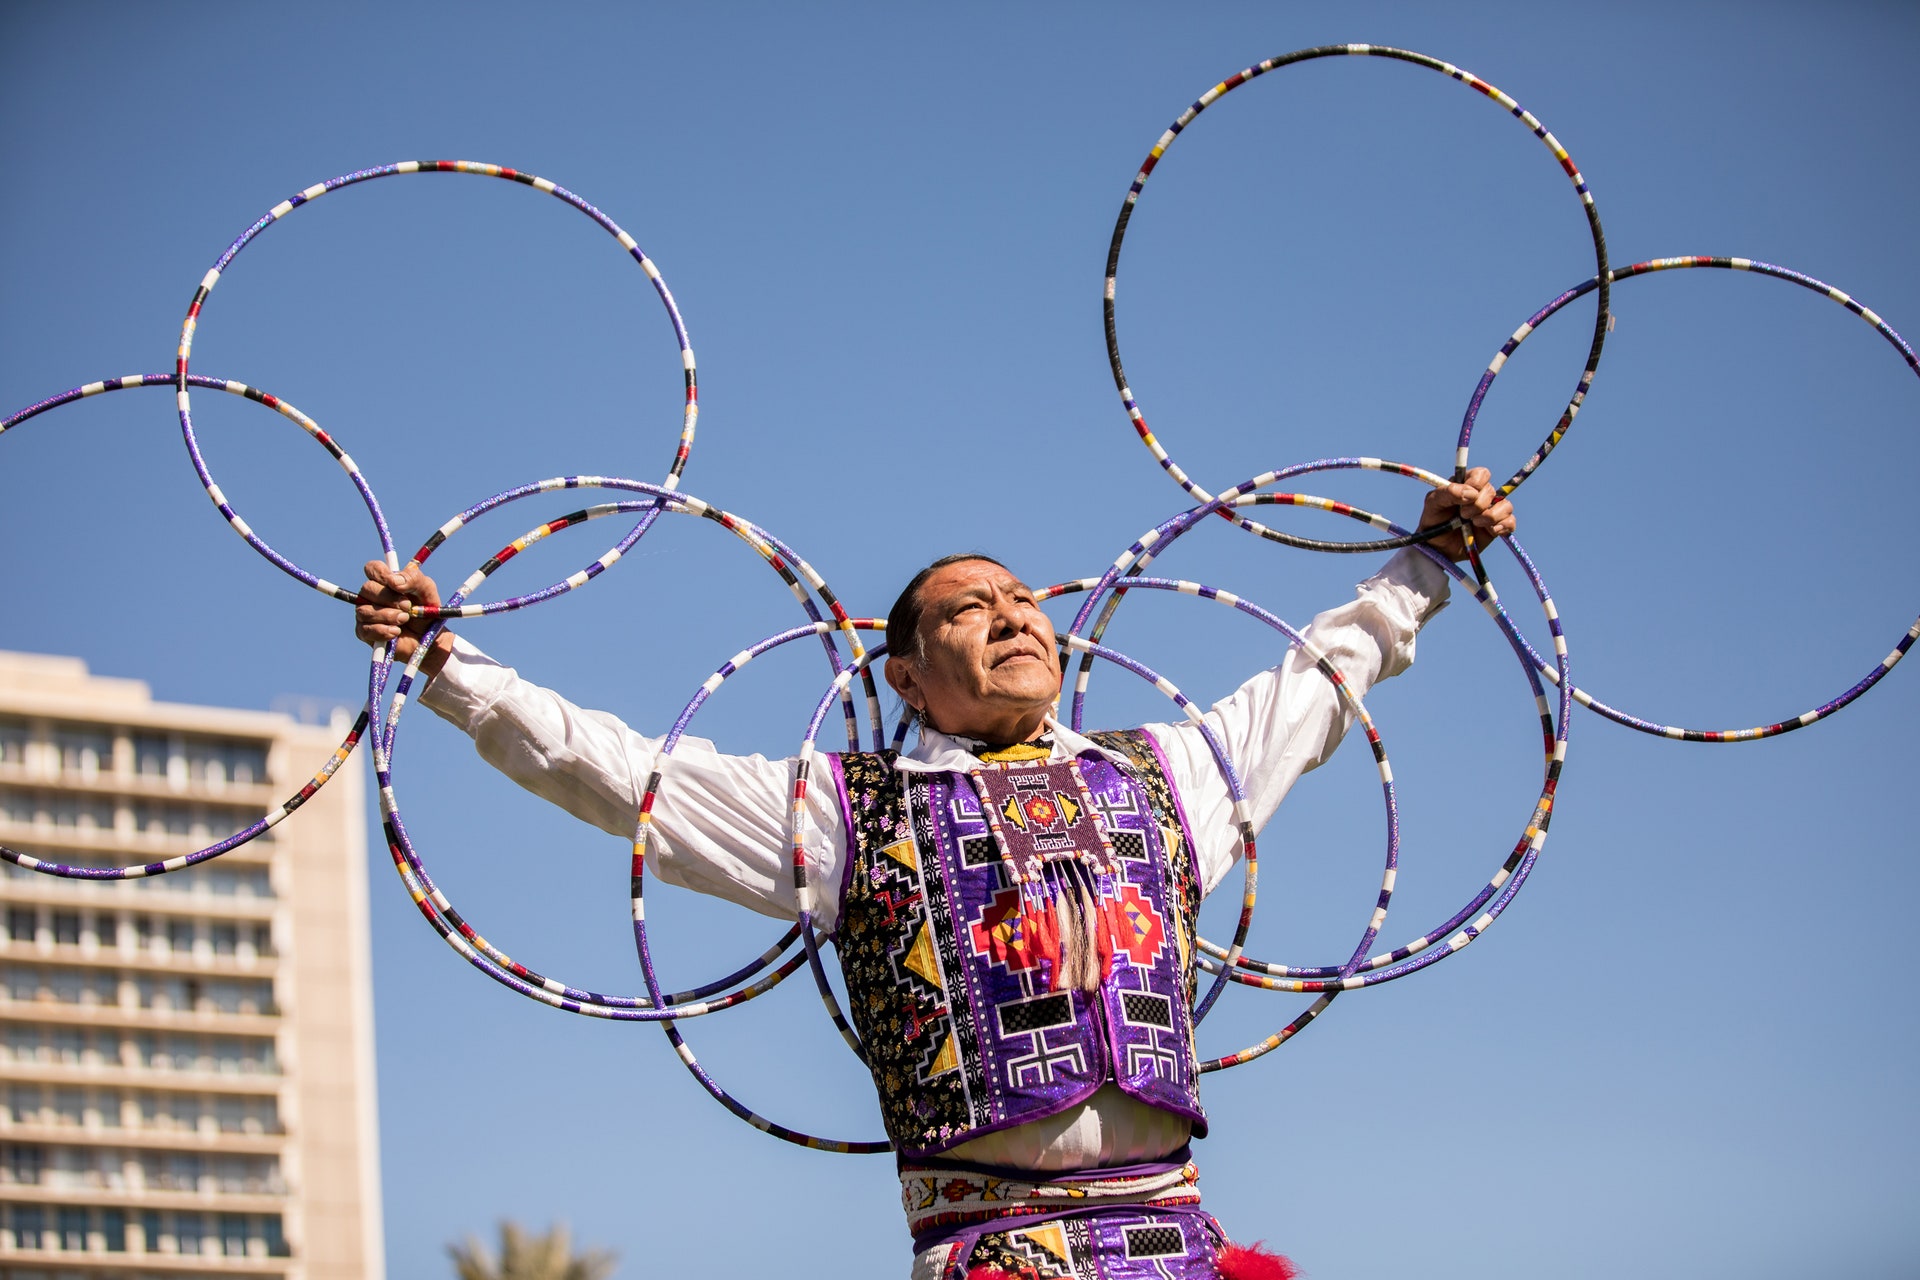 A man performing the Hoop Dance against a clear blue sky. The hoops on his arms resemble wings.